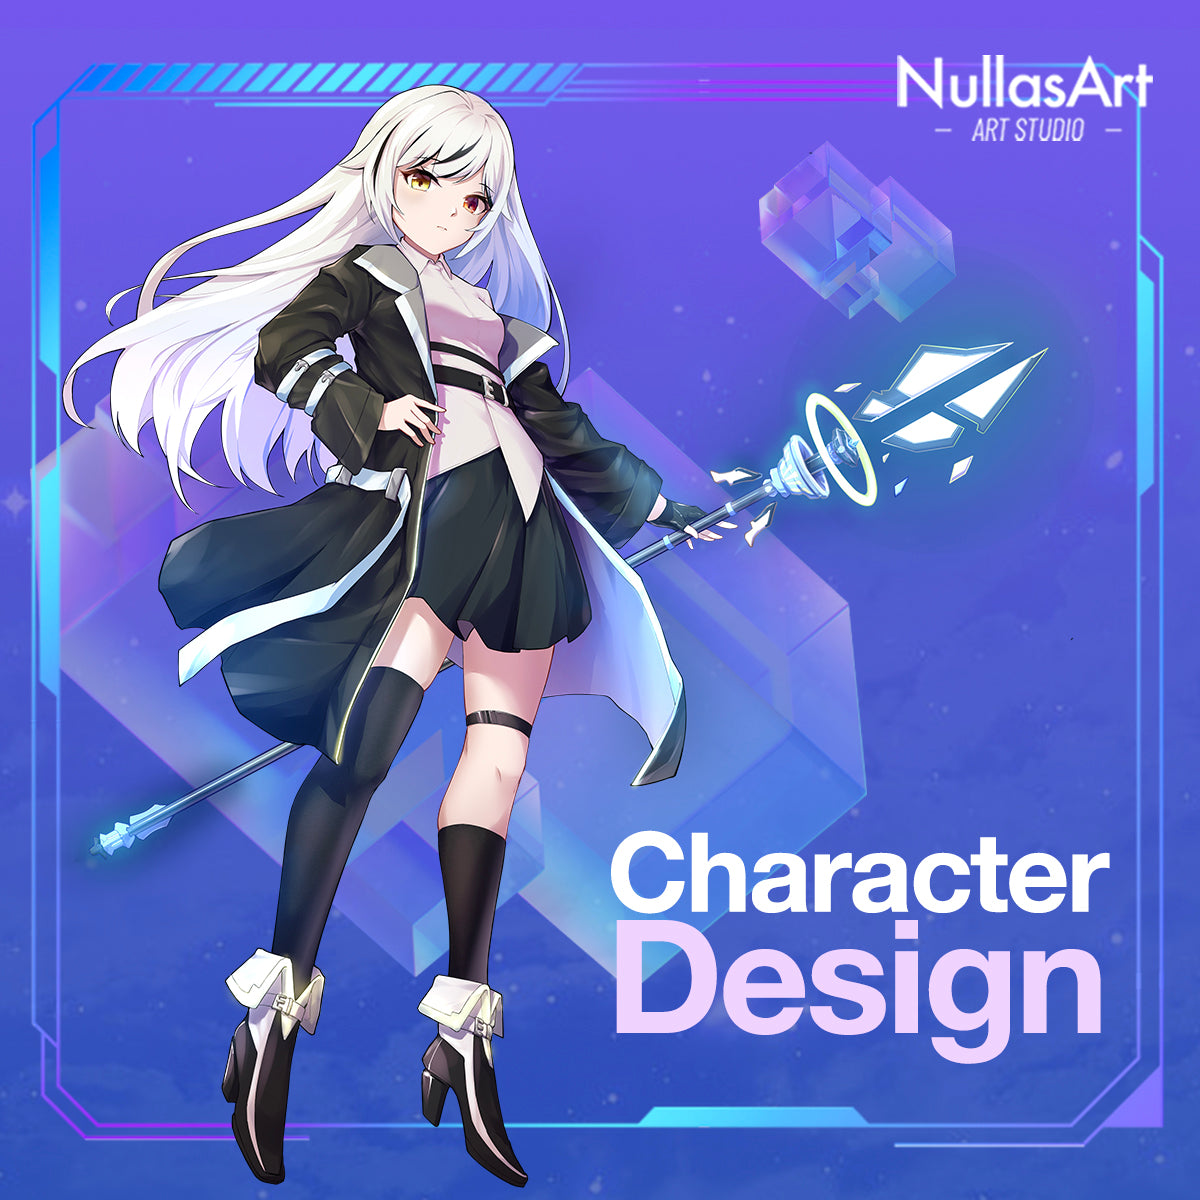 Pro Anime Commission Character Commission and Design Custom